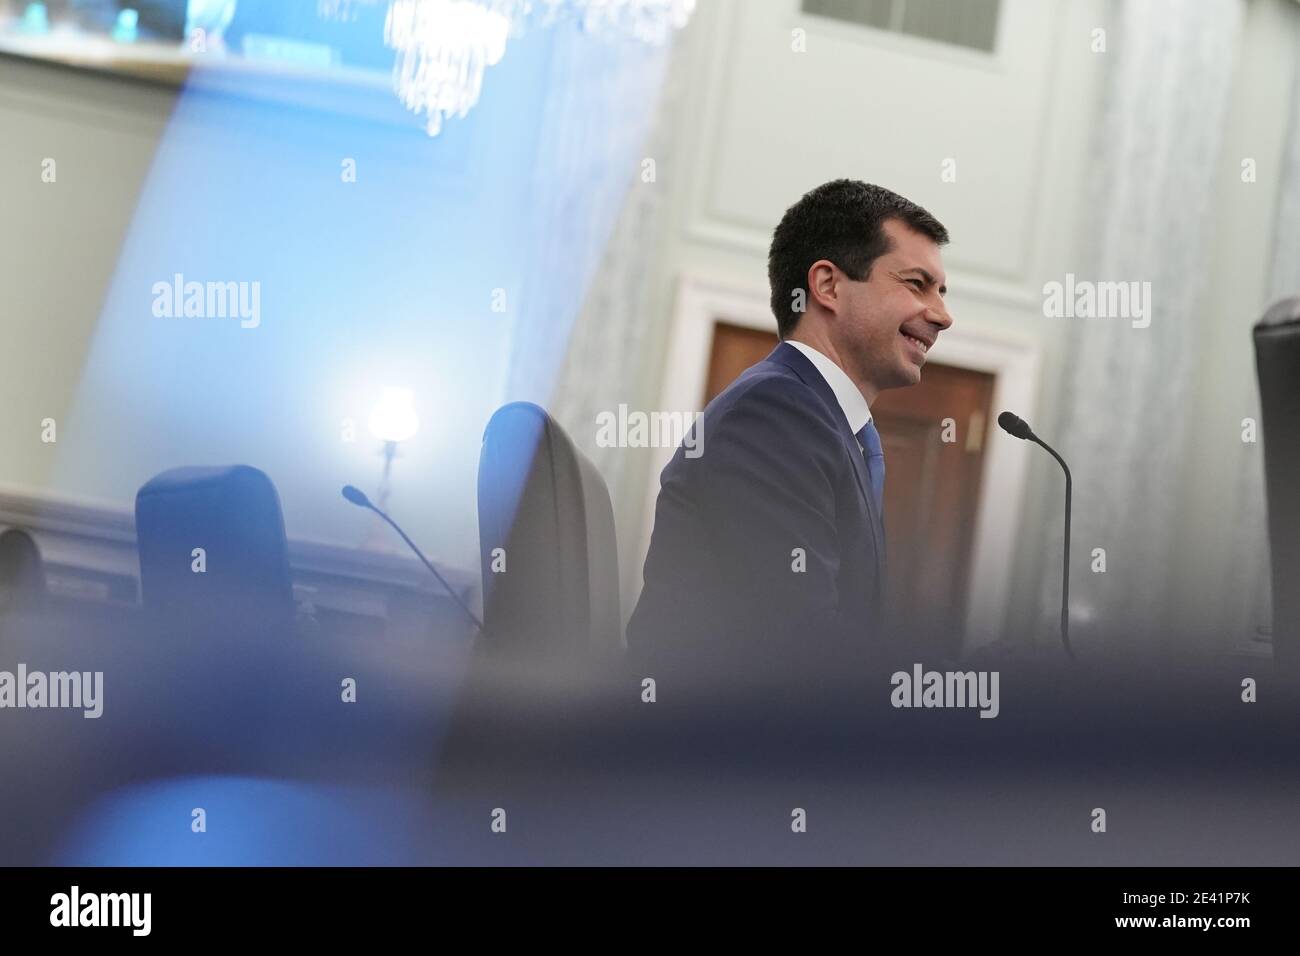 Washington, DC, USA. 21st Jan, 2021. Pete Buttigieg, U.S. secretary of transportation nominee for U.S. President Joe Biden, smiles during a Senate Commerce, Science and Transportation Committee confirmation hearing in Washington, DC, U.S., on Thursday, Jan. 21, 2021. Buttigieg, is pledging to carry out the administration's ambitious agenda to rebuild the nation's infrastructure, calling it a 'generational opportunity' to create new jobs, fight economic inequality and stem climate change. Credit: Stefani Reynolds/Pool via CNP | usage worldwide Credit: dpa/Alamy Live News Stock Photo